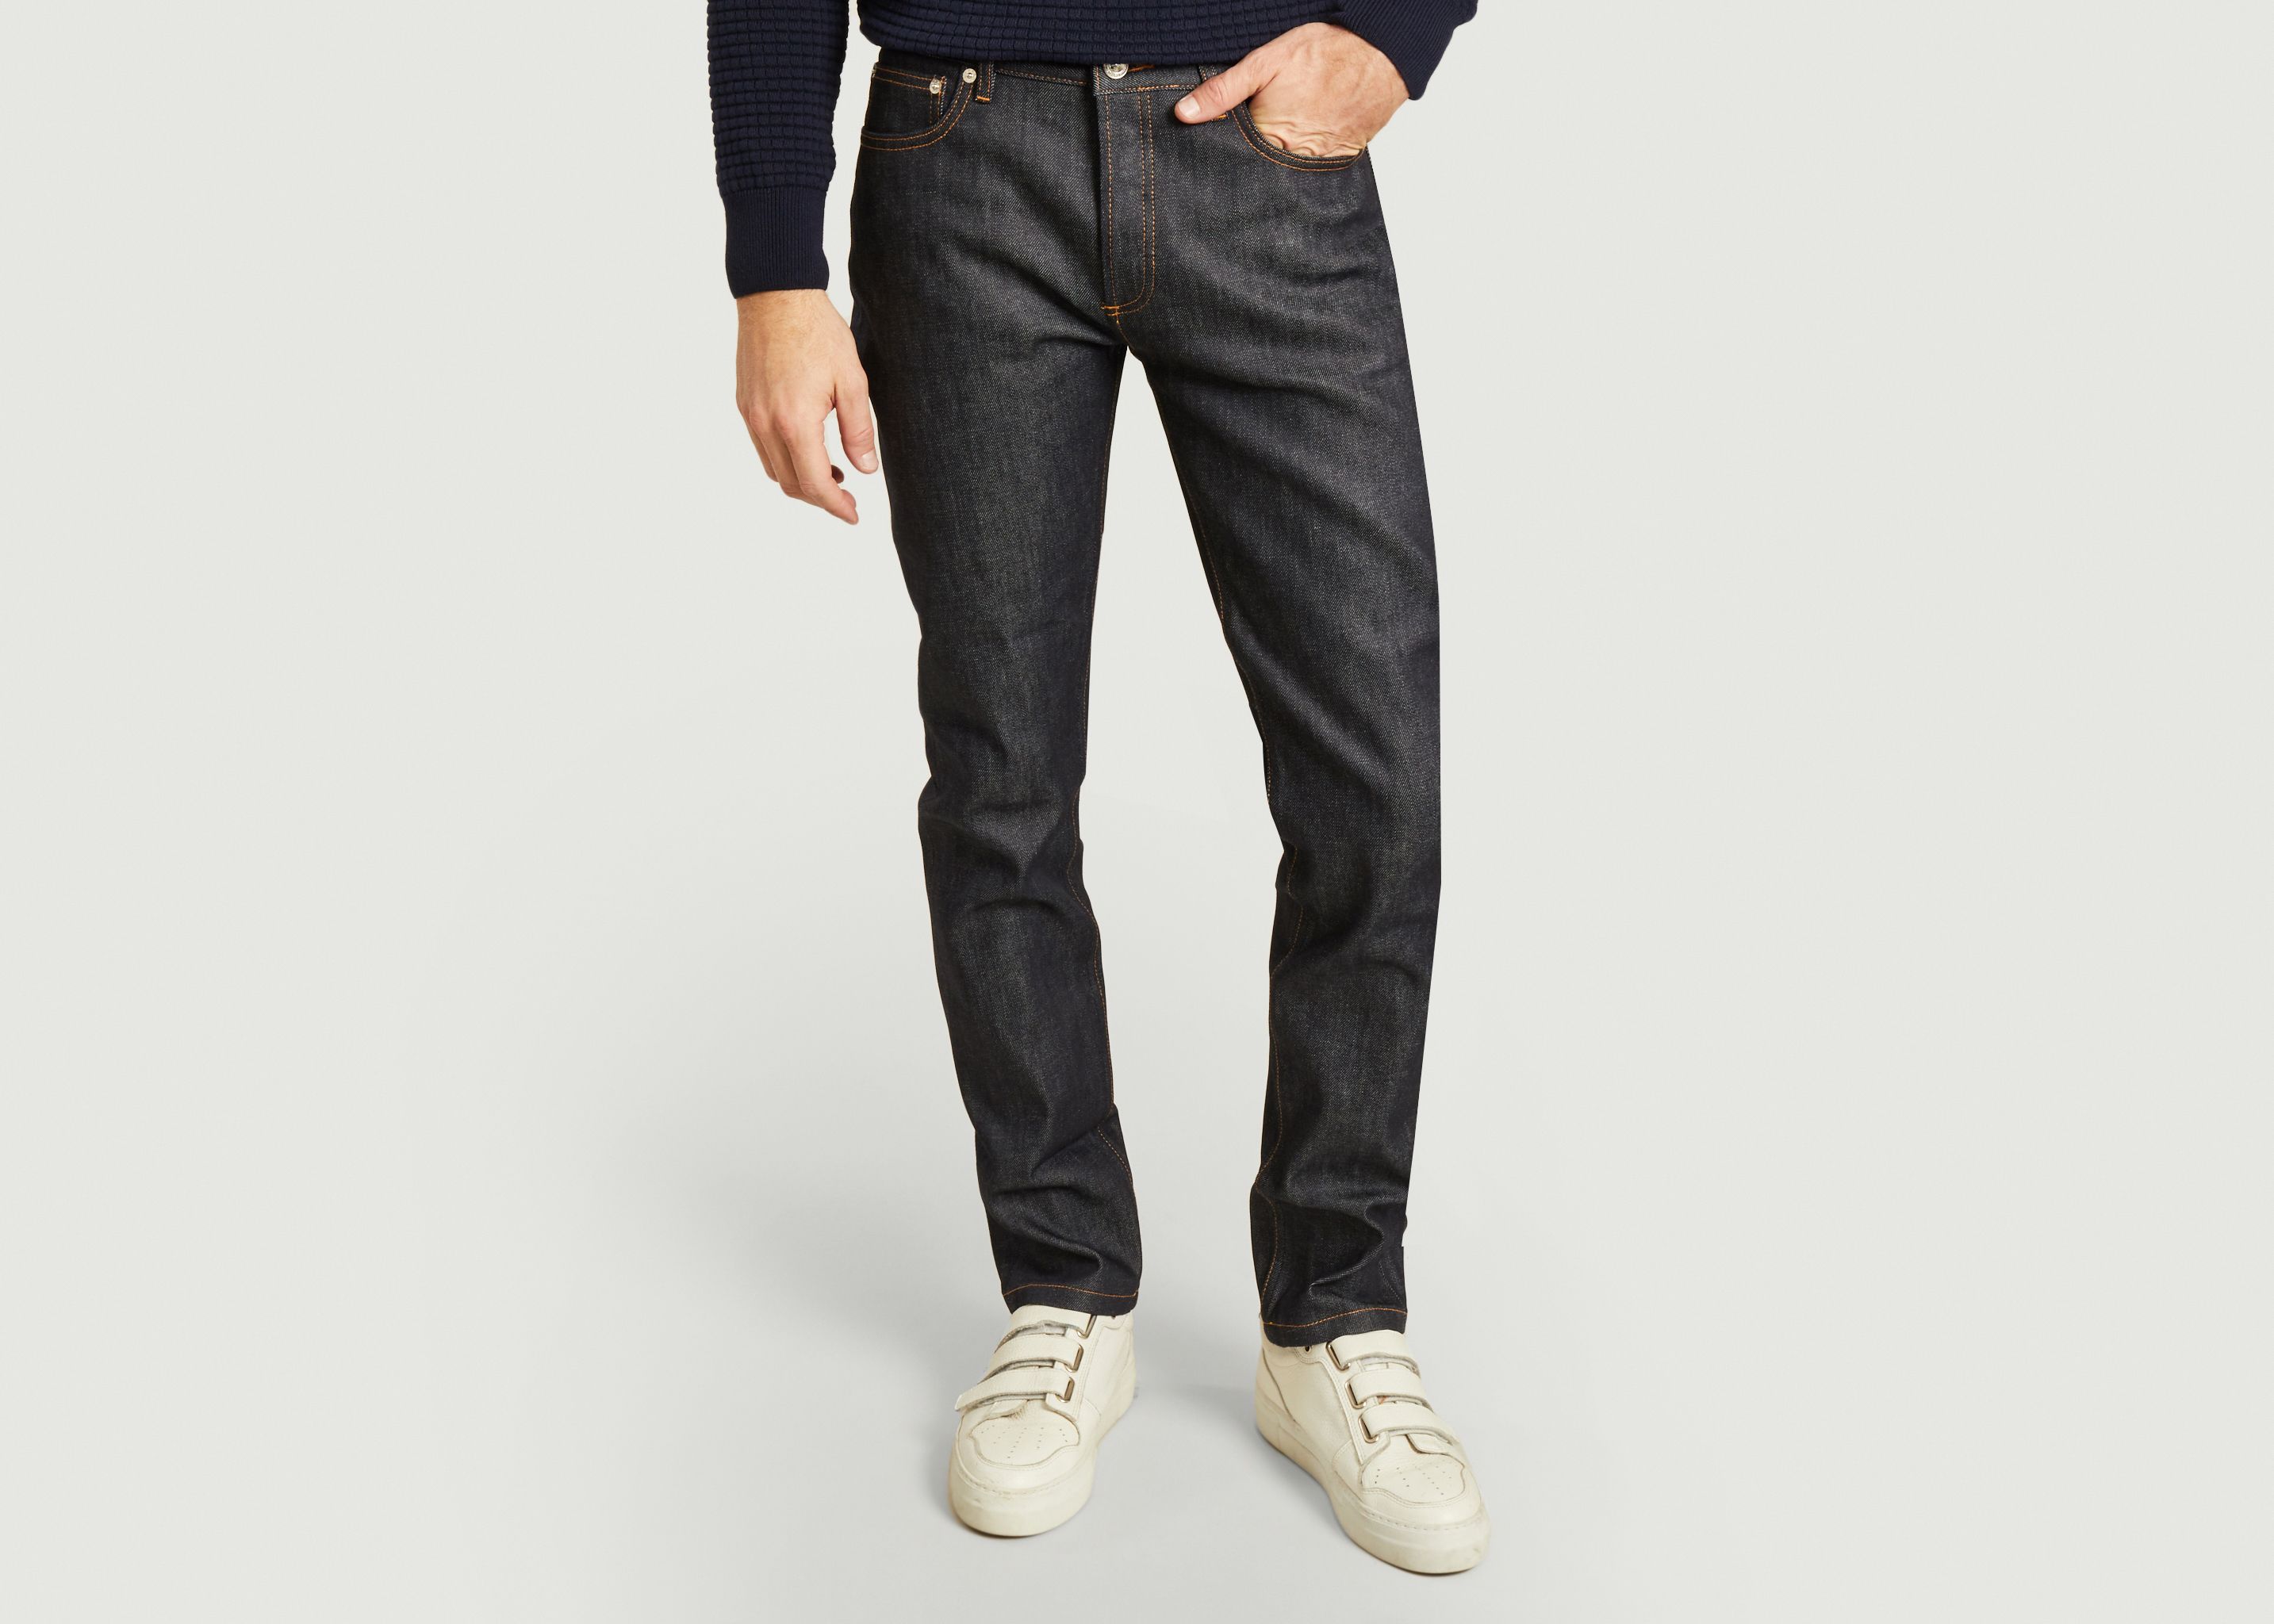 New Standard Jeans - A.P.C.